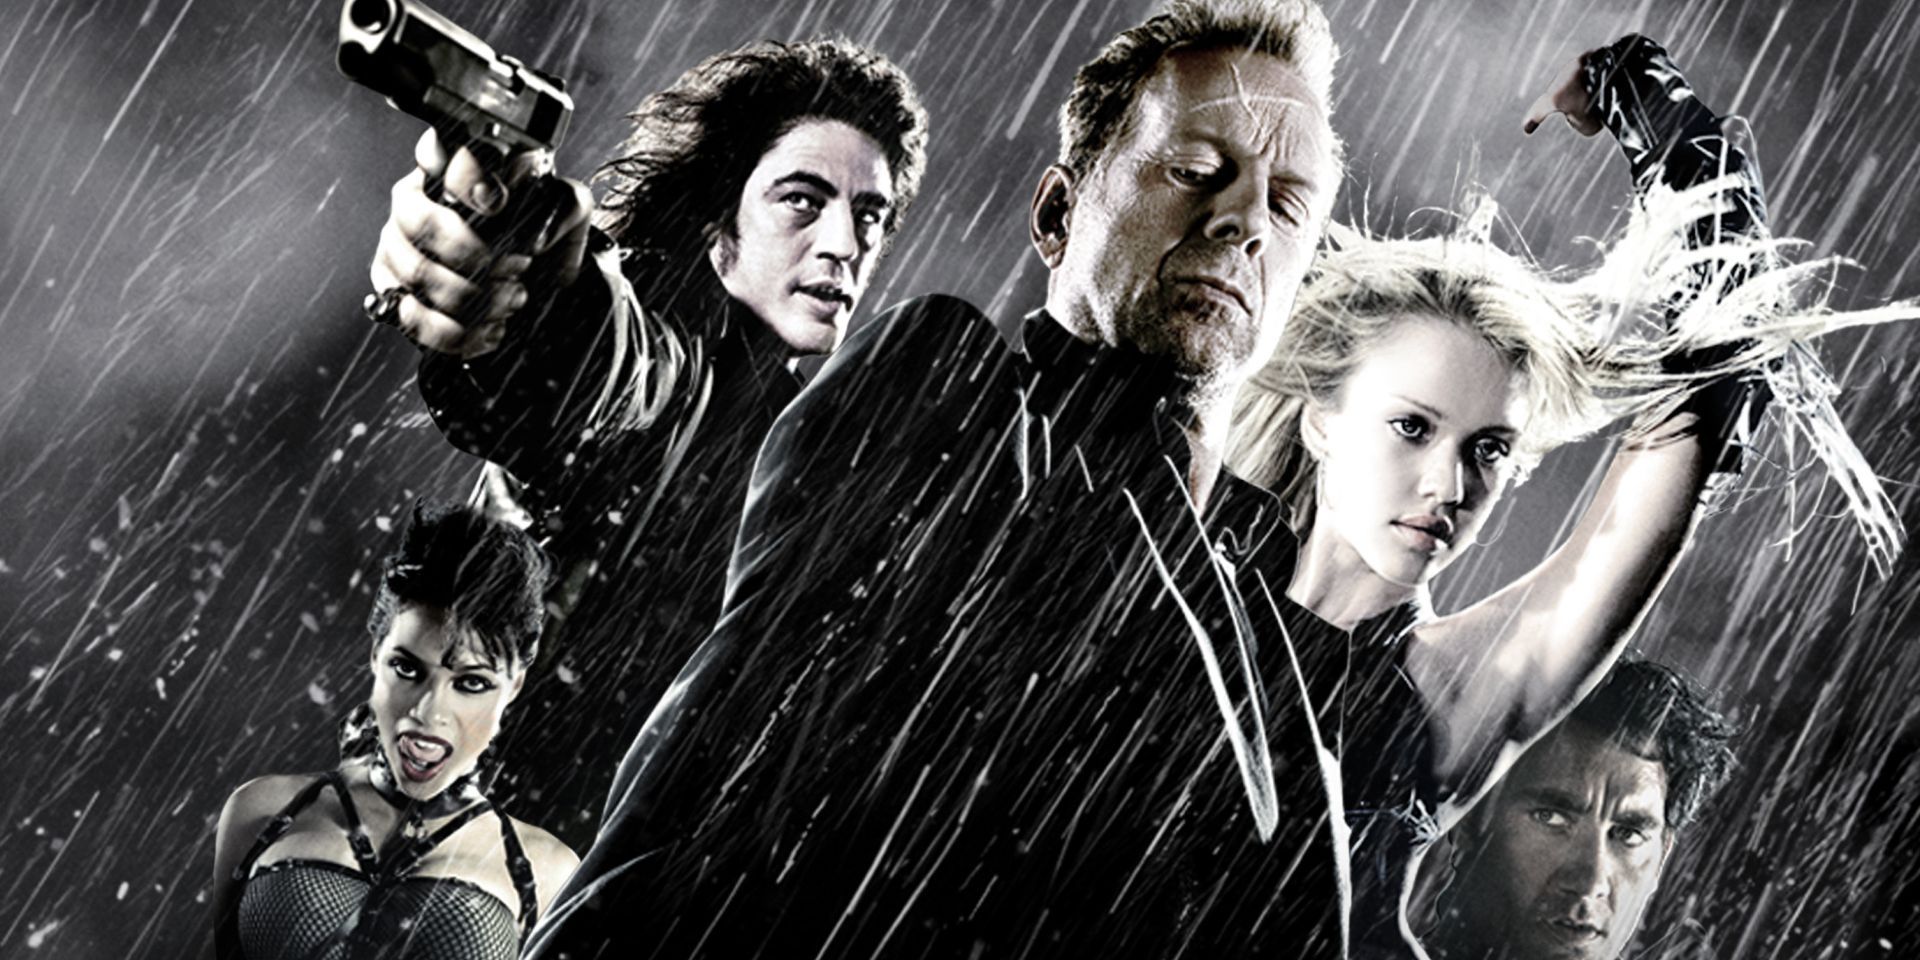 Characters of Robert Rodriguez's Sin City in collaboration with Tarantino